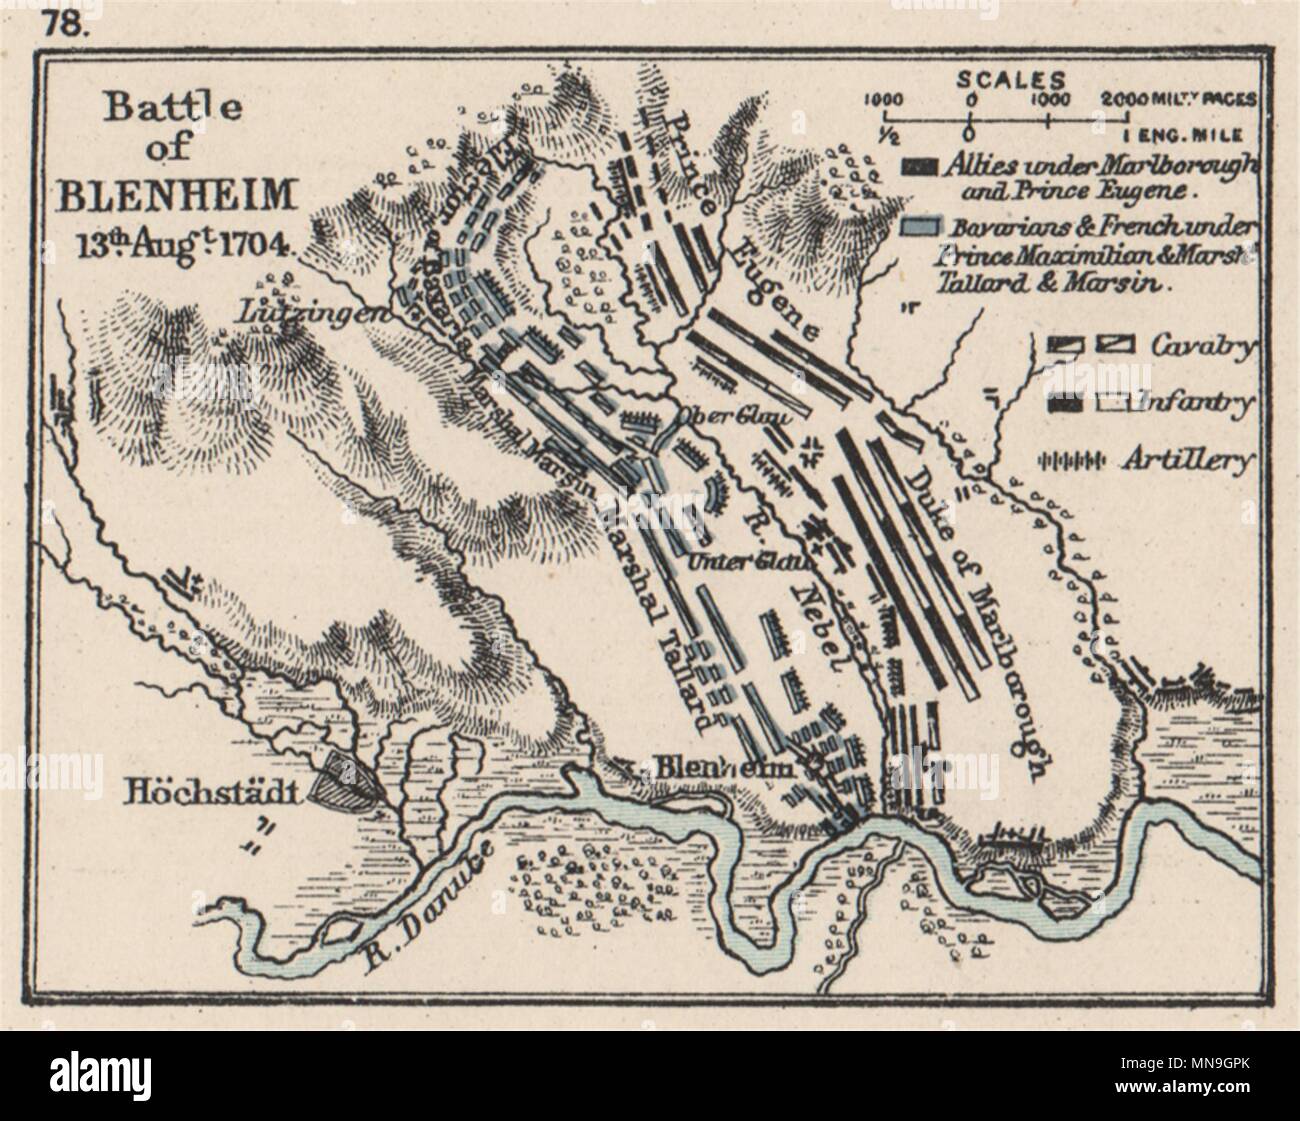 WAR OF SPANISH SUCCESSION. Battle of Blenheim 13th Aug. 1704. SMALL 1907 map Stock Photo